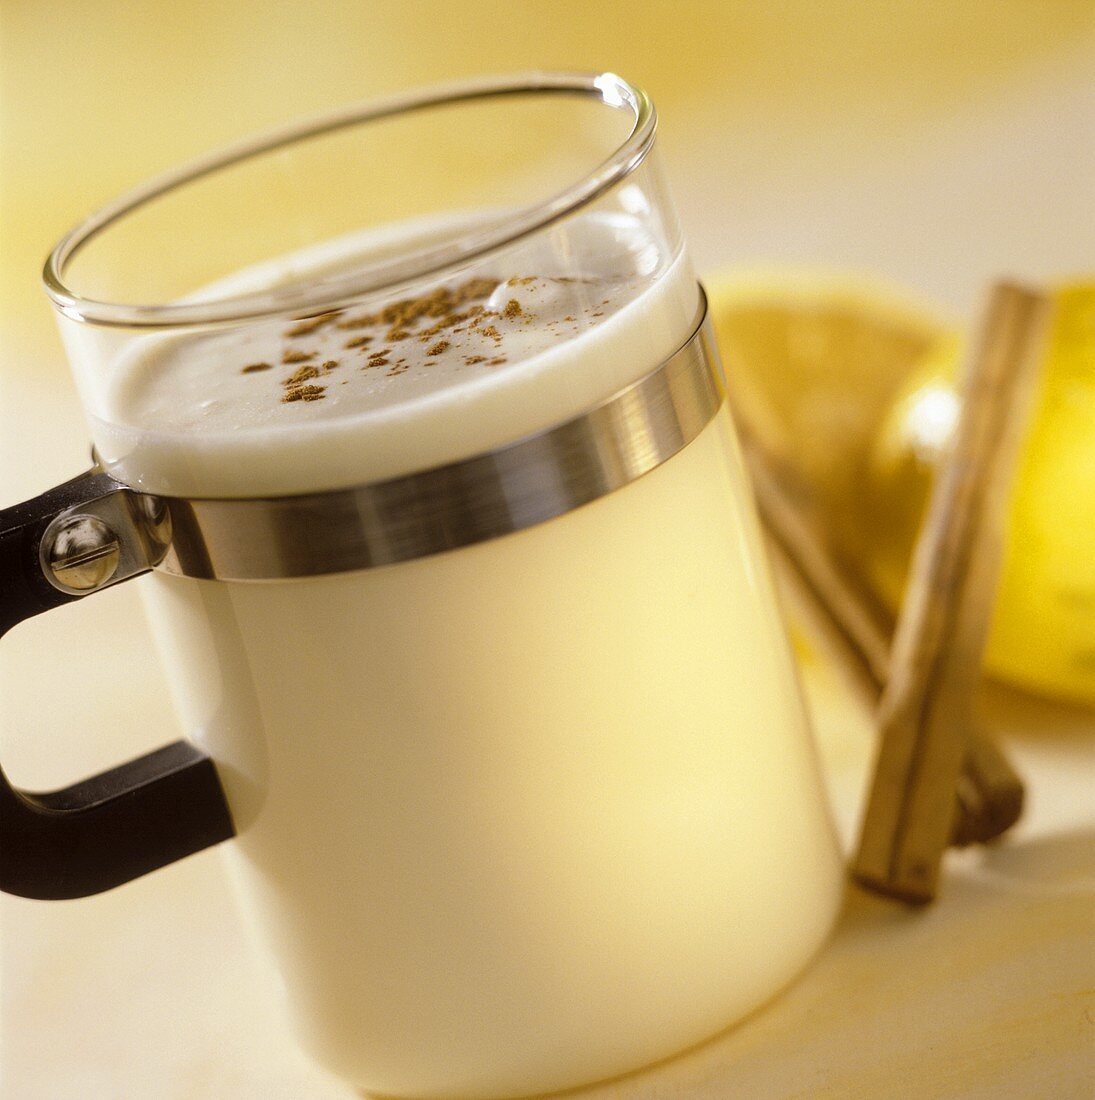 Hot advocaat drink with cinnamon